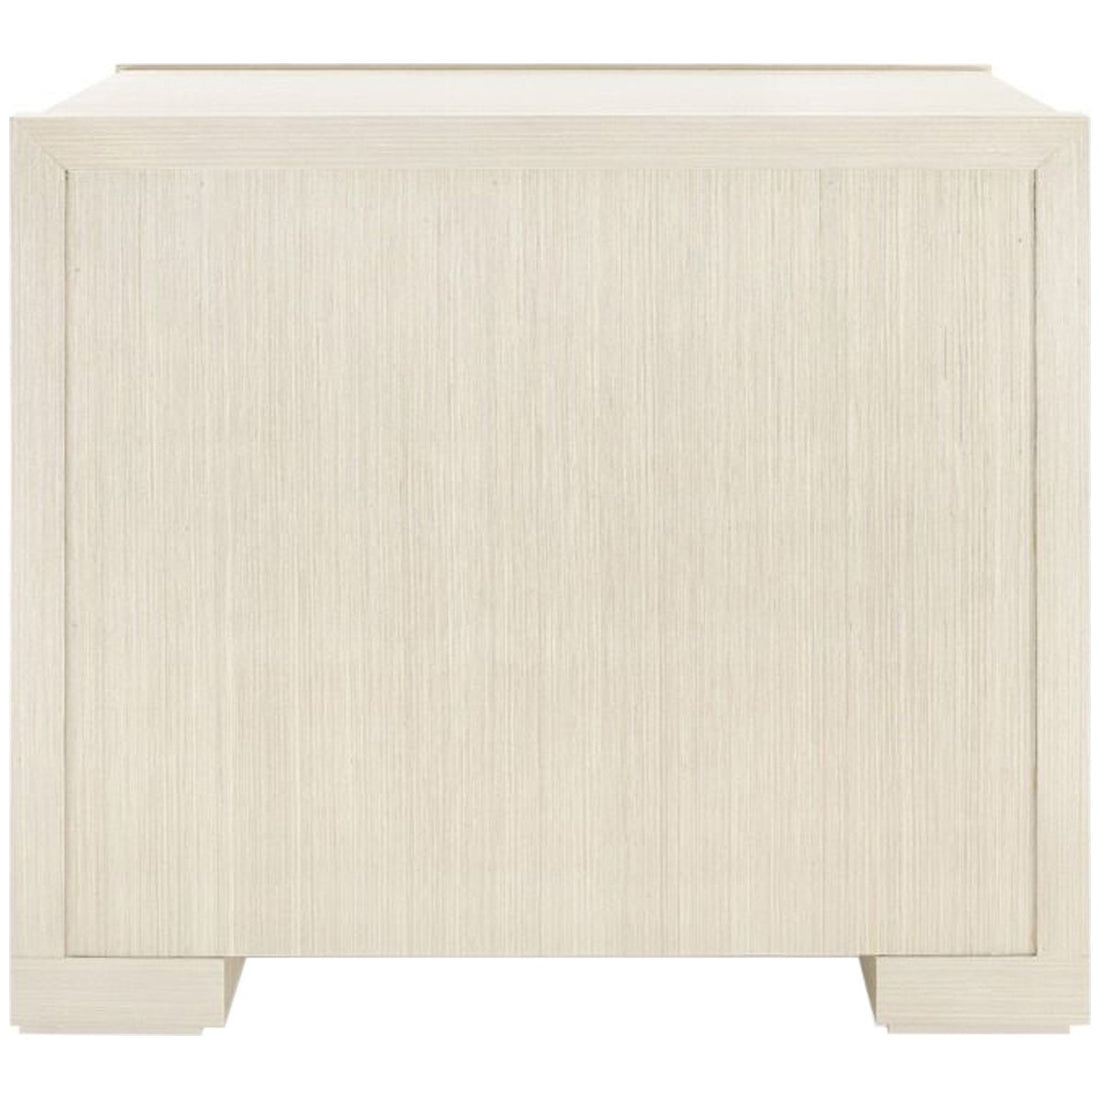 Villa & House Blake 3-Drawer Side Table with Owen Pull